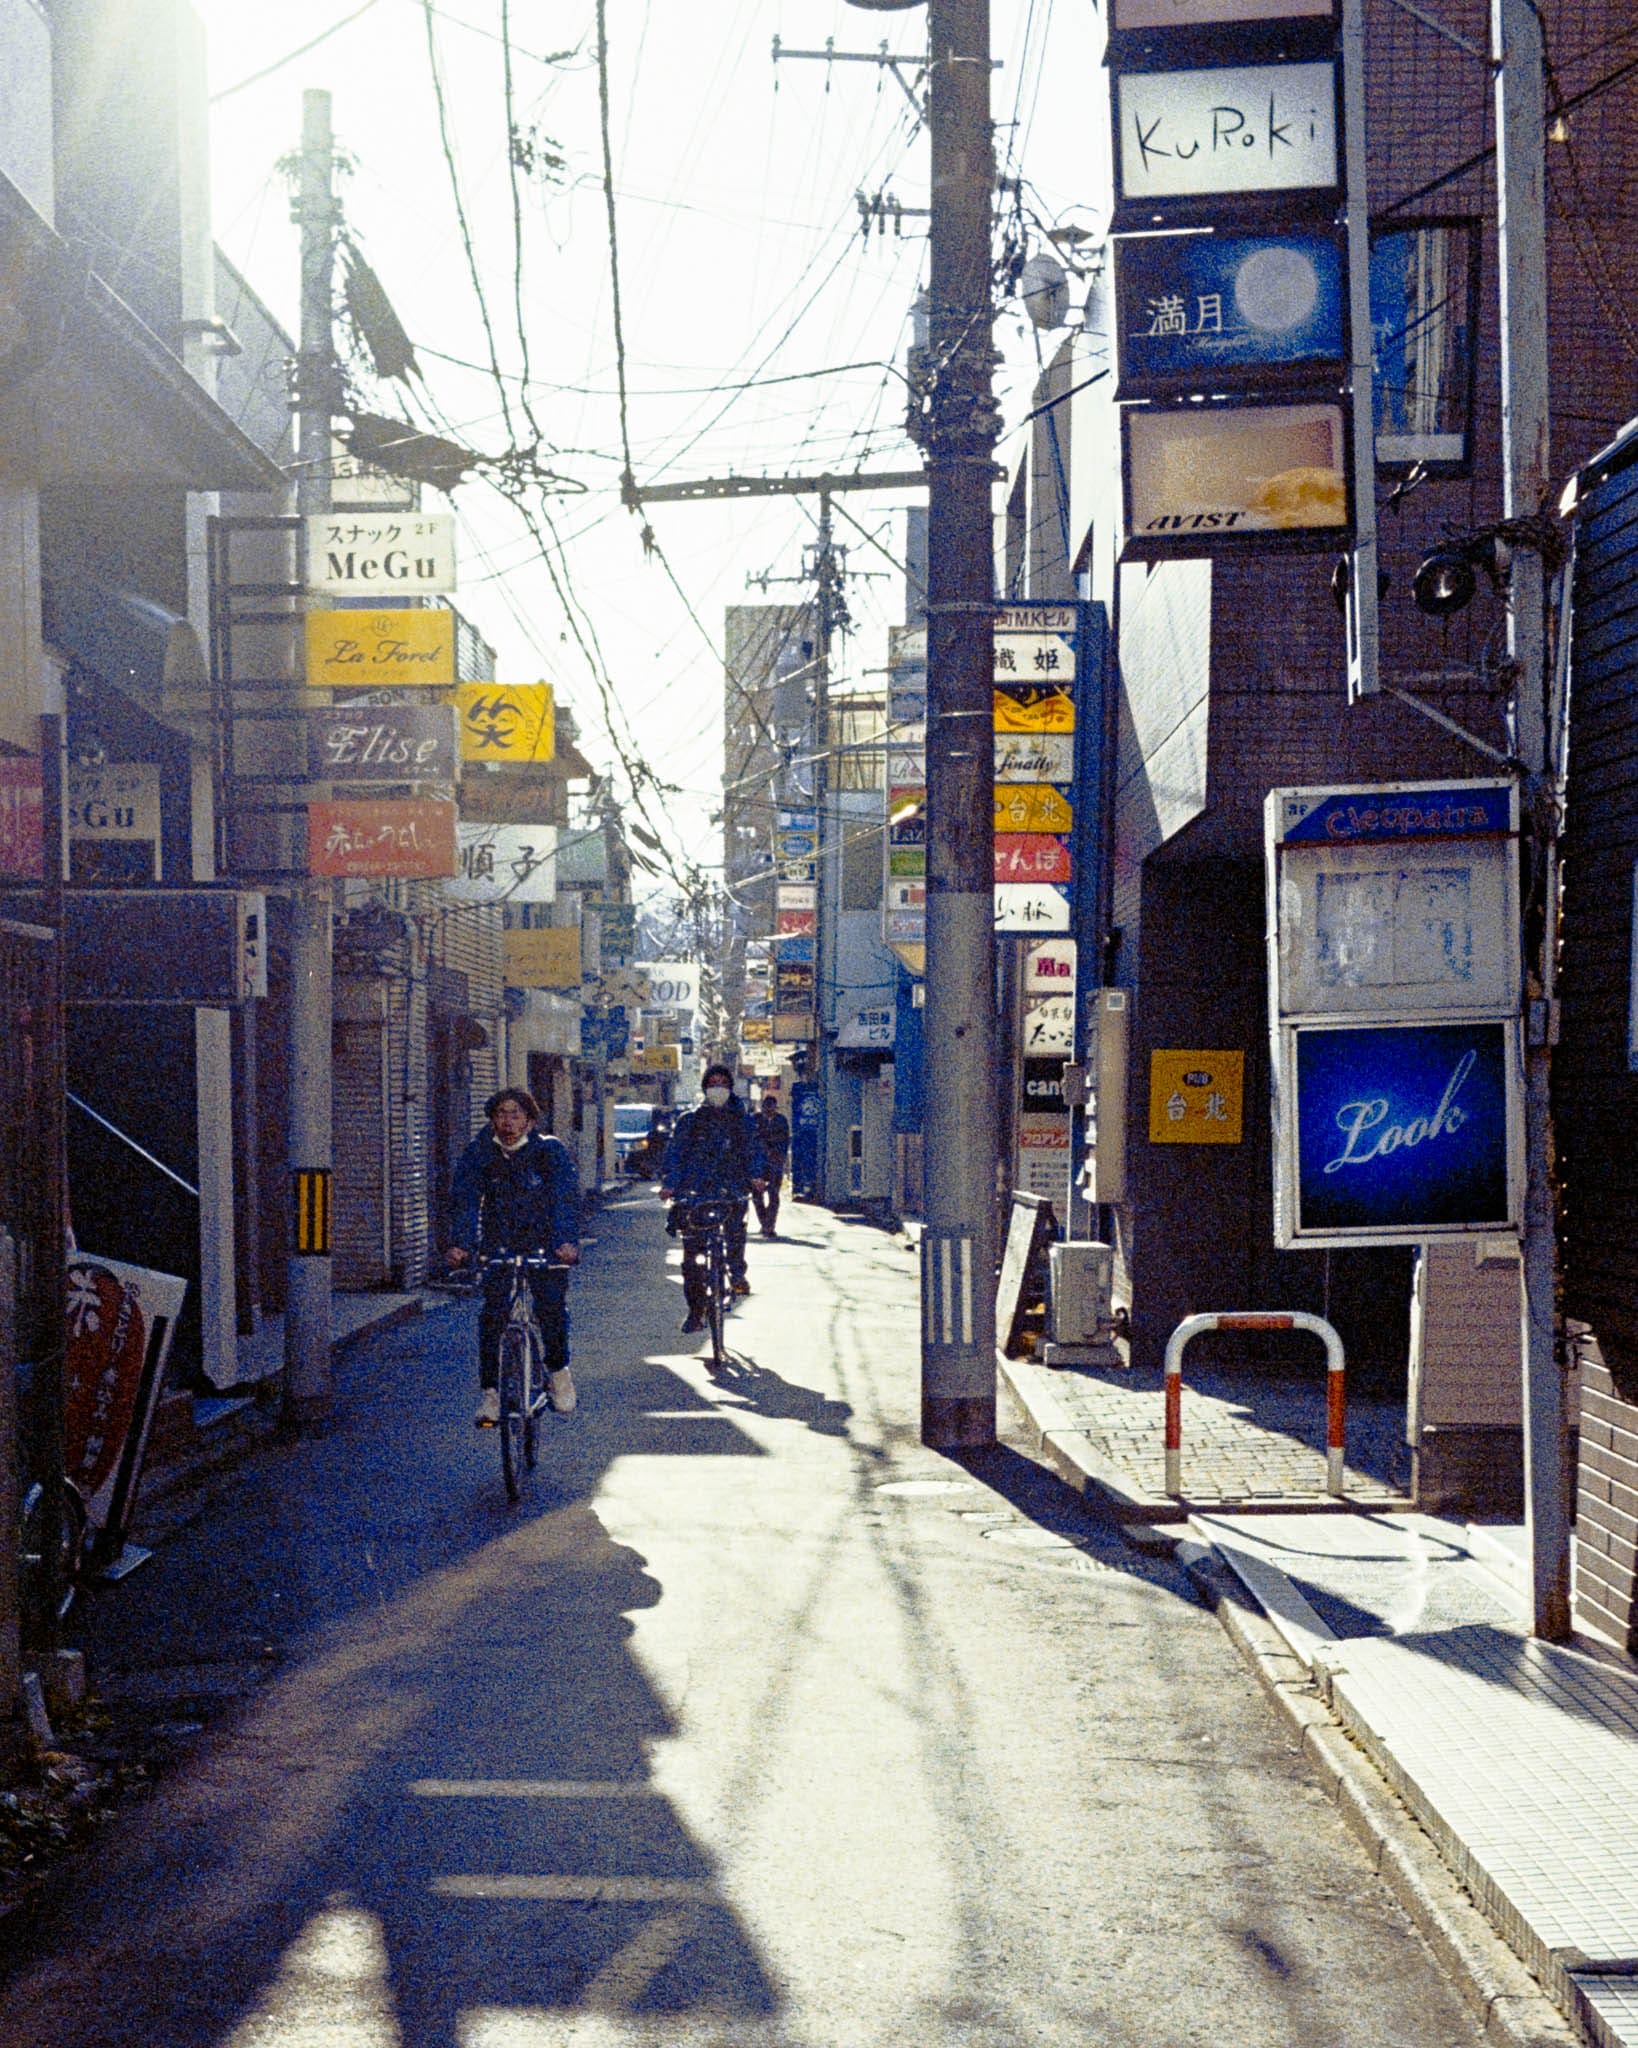 Sunlit Japanese street with cyclist and pedestrians amidst shadows in a serene urban scene.